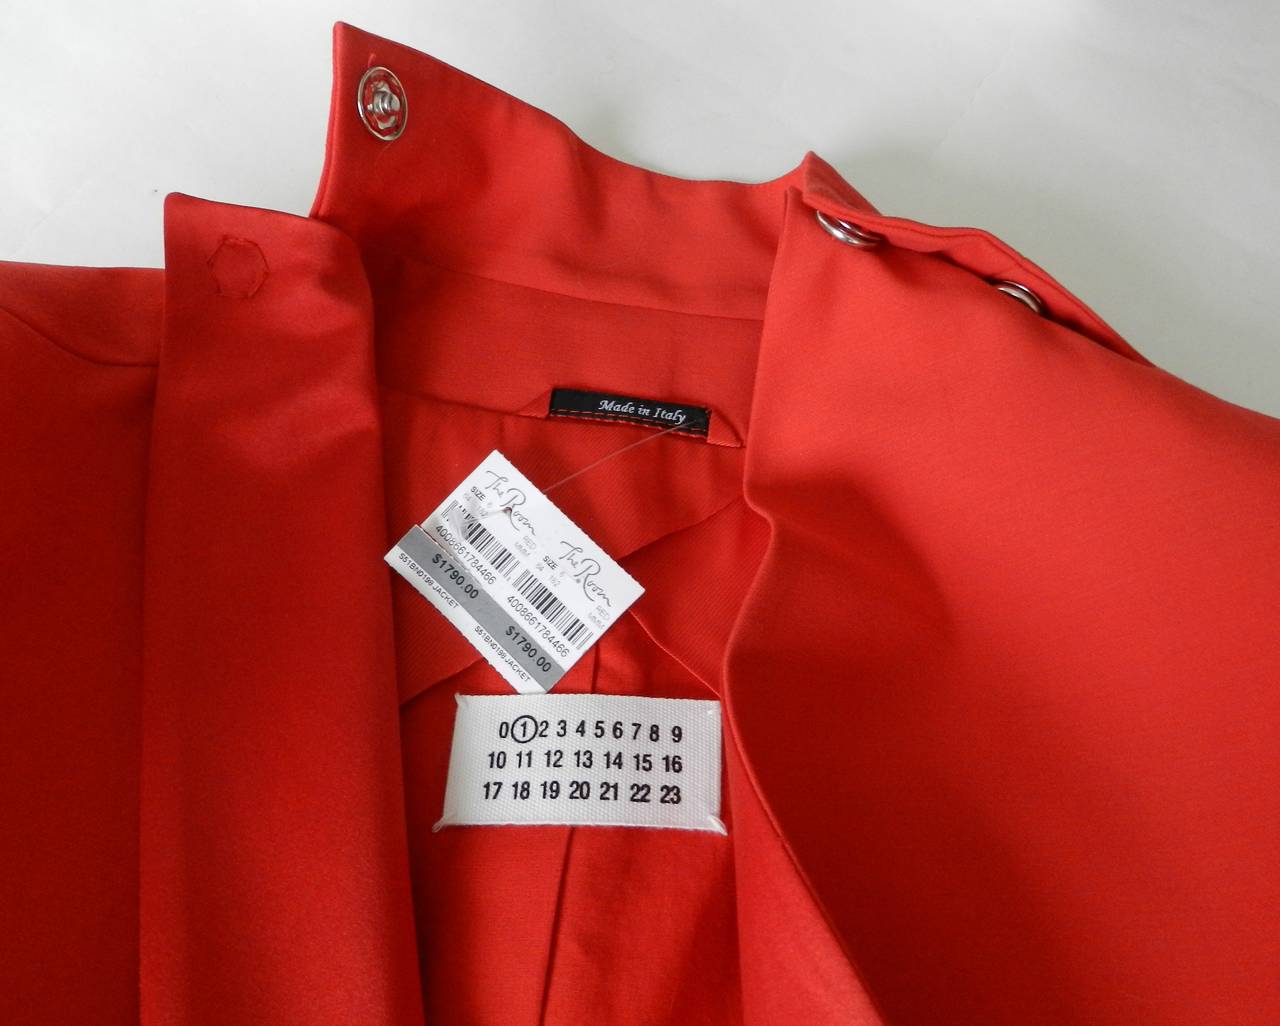 Maison Martin Margiela Wool and Satin Red Pant Suit 2